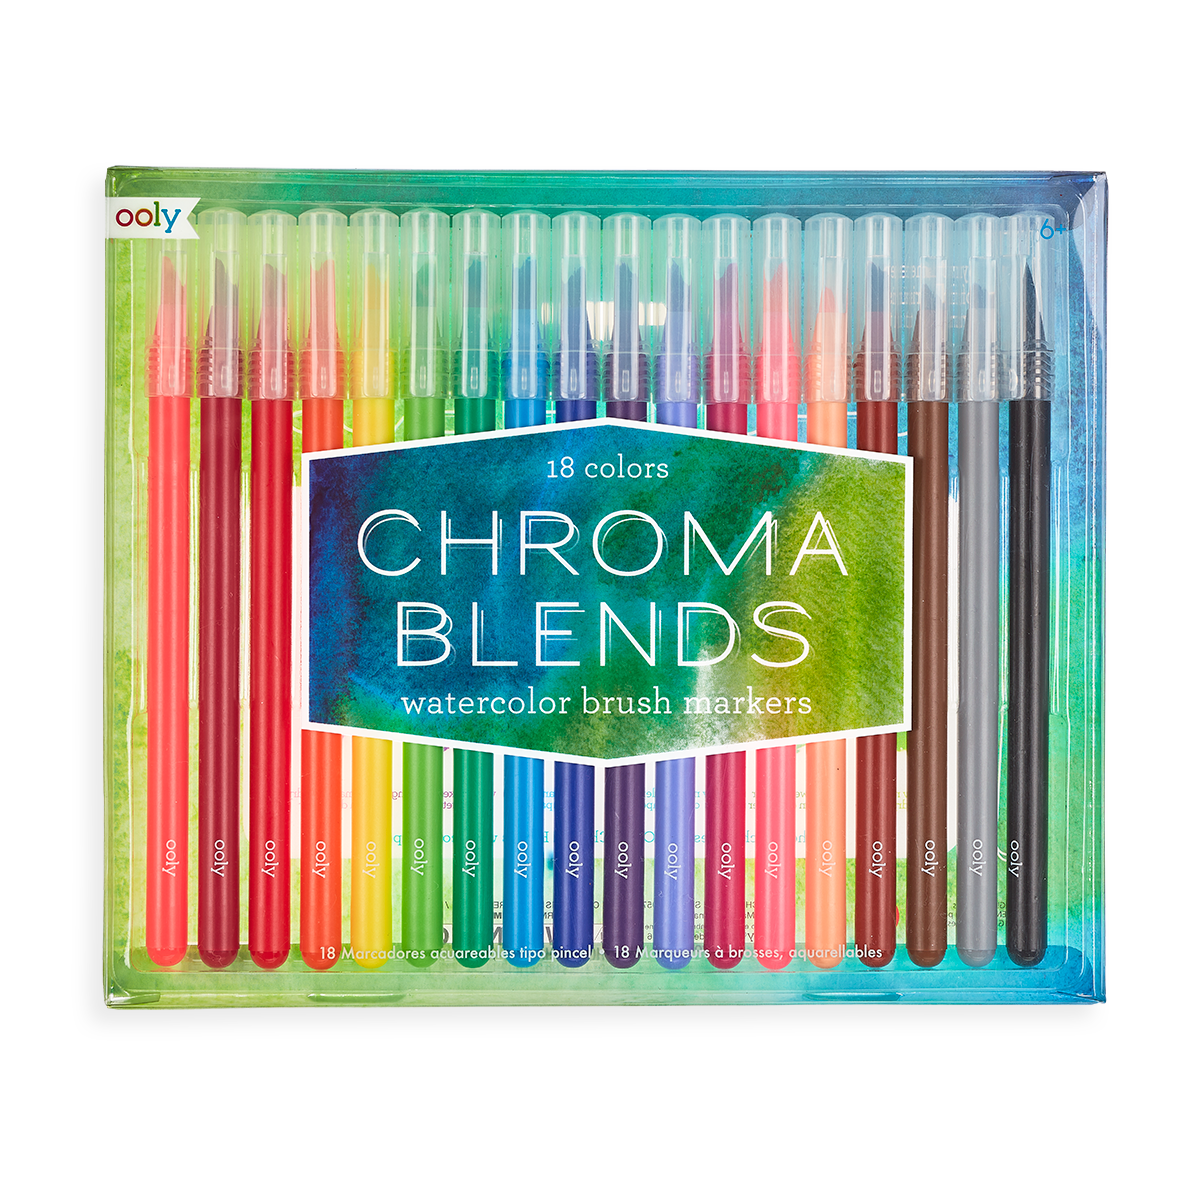 Set of 18 Chroma Blends watercolor brush markers